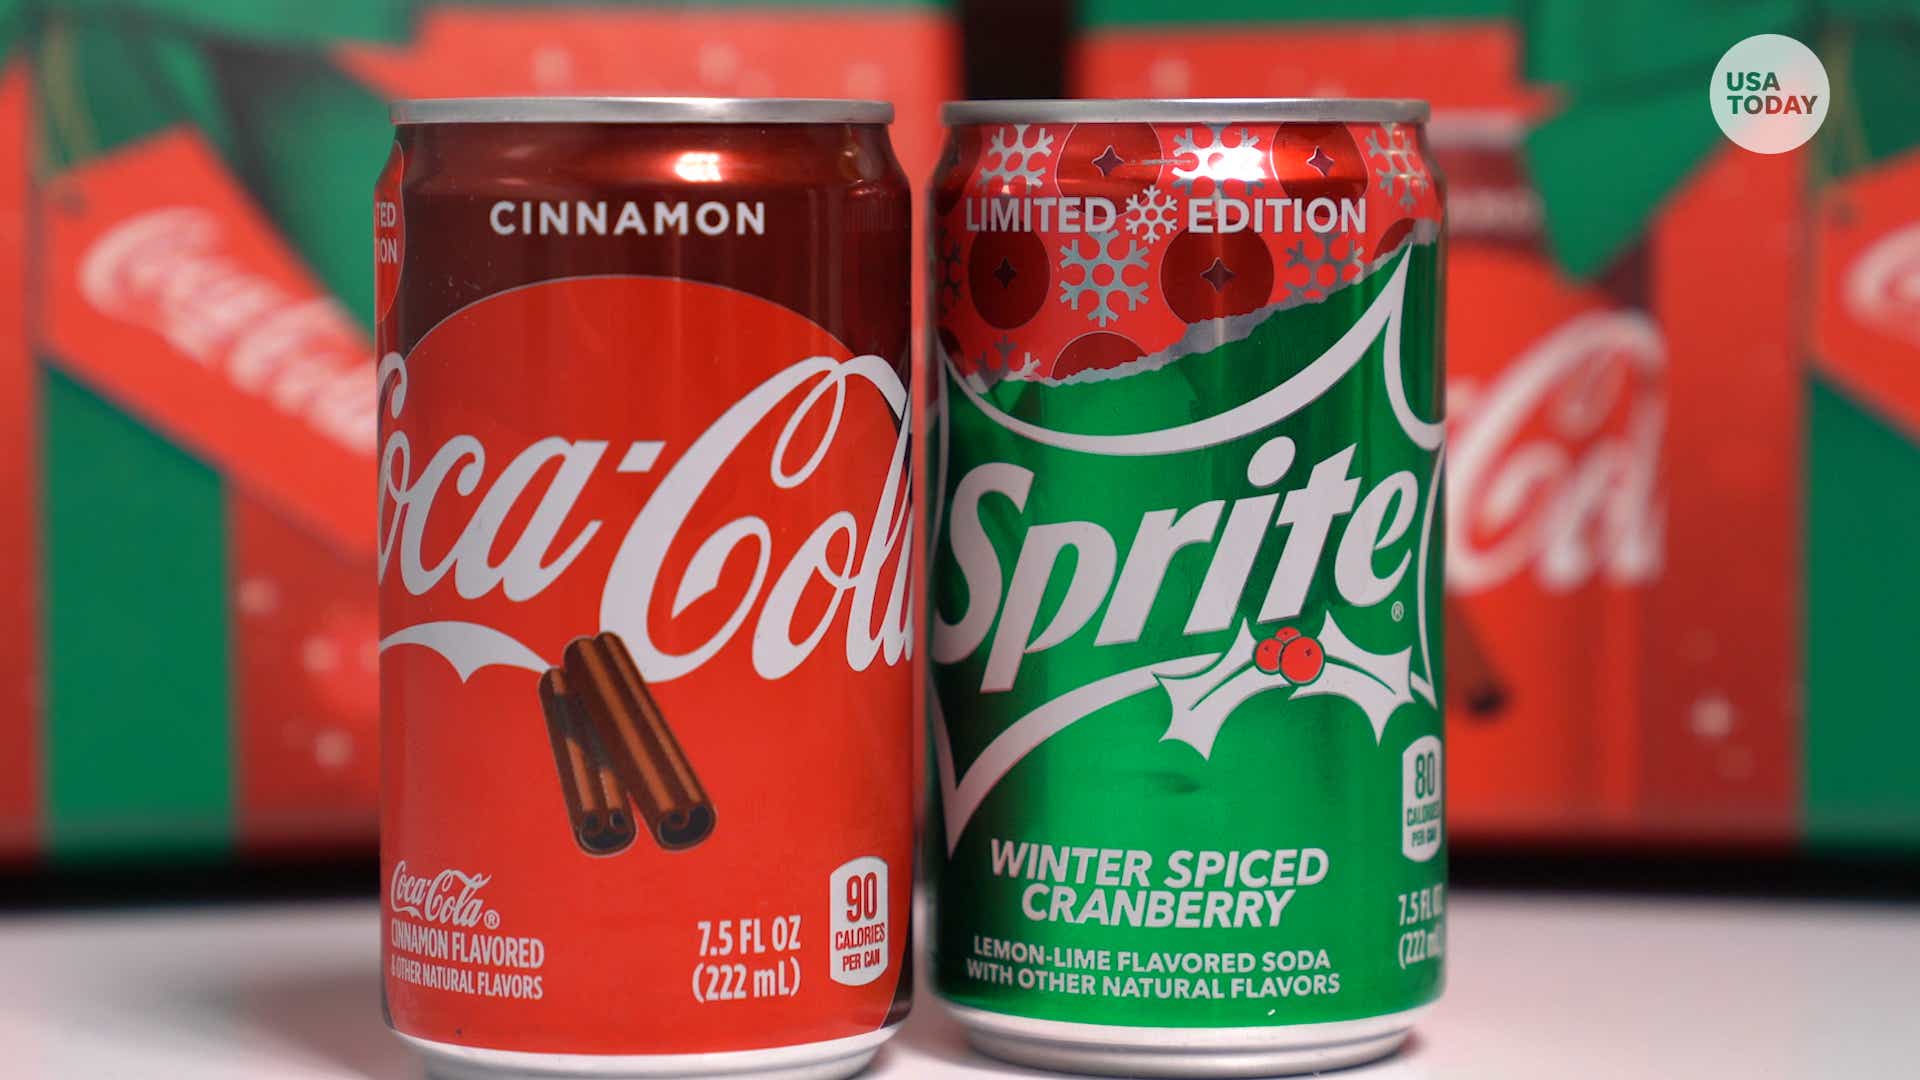 Coca Cola Has Released Two Limited Edition Holiday Flavored Sodas